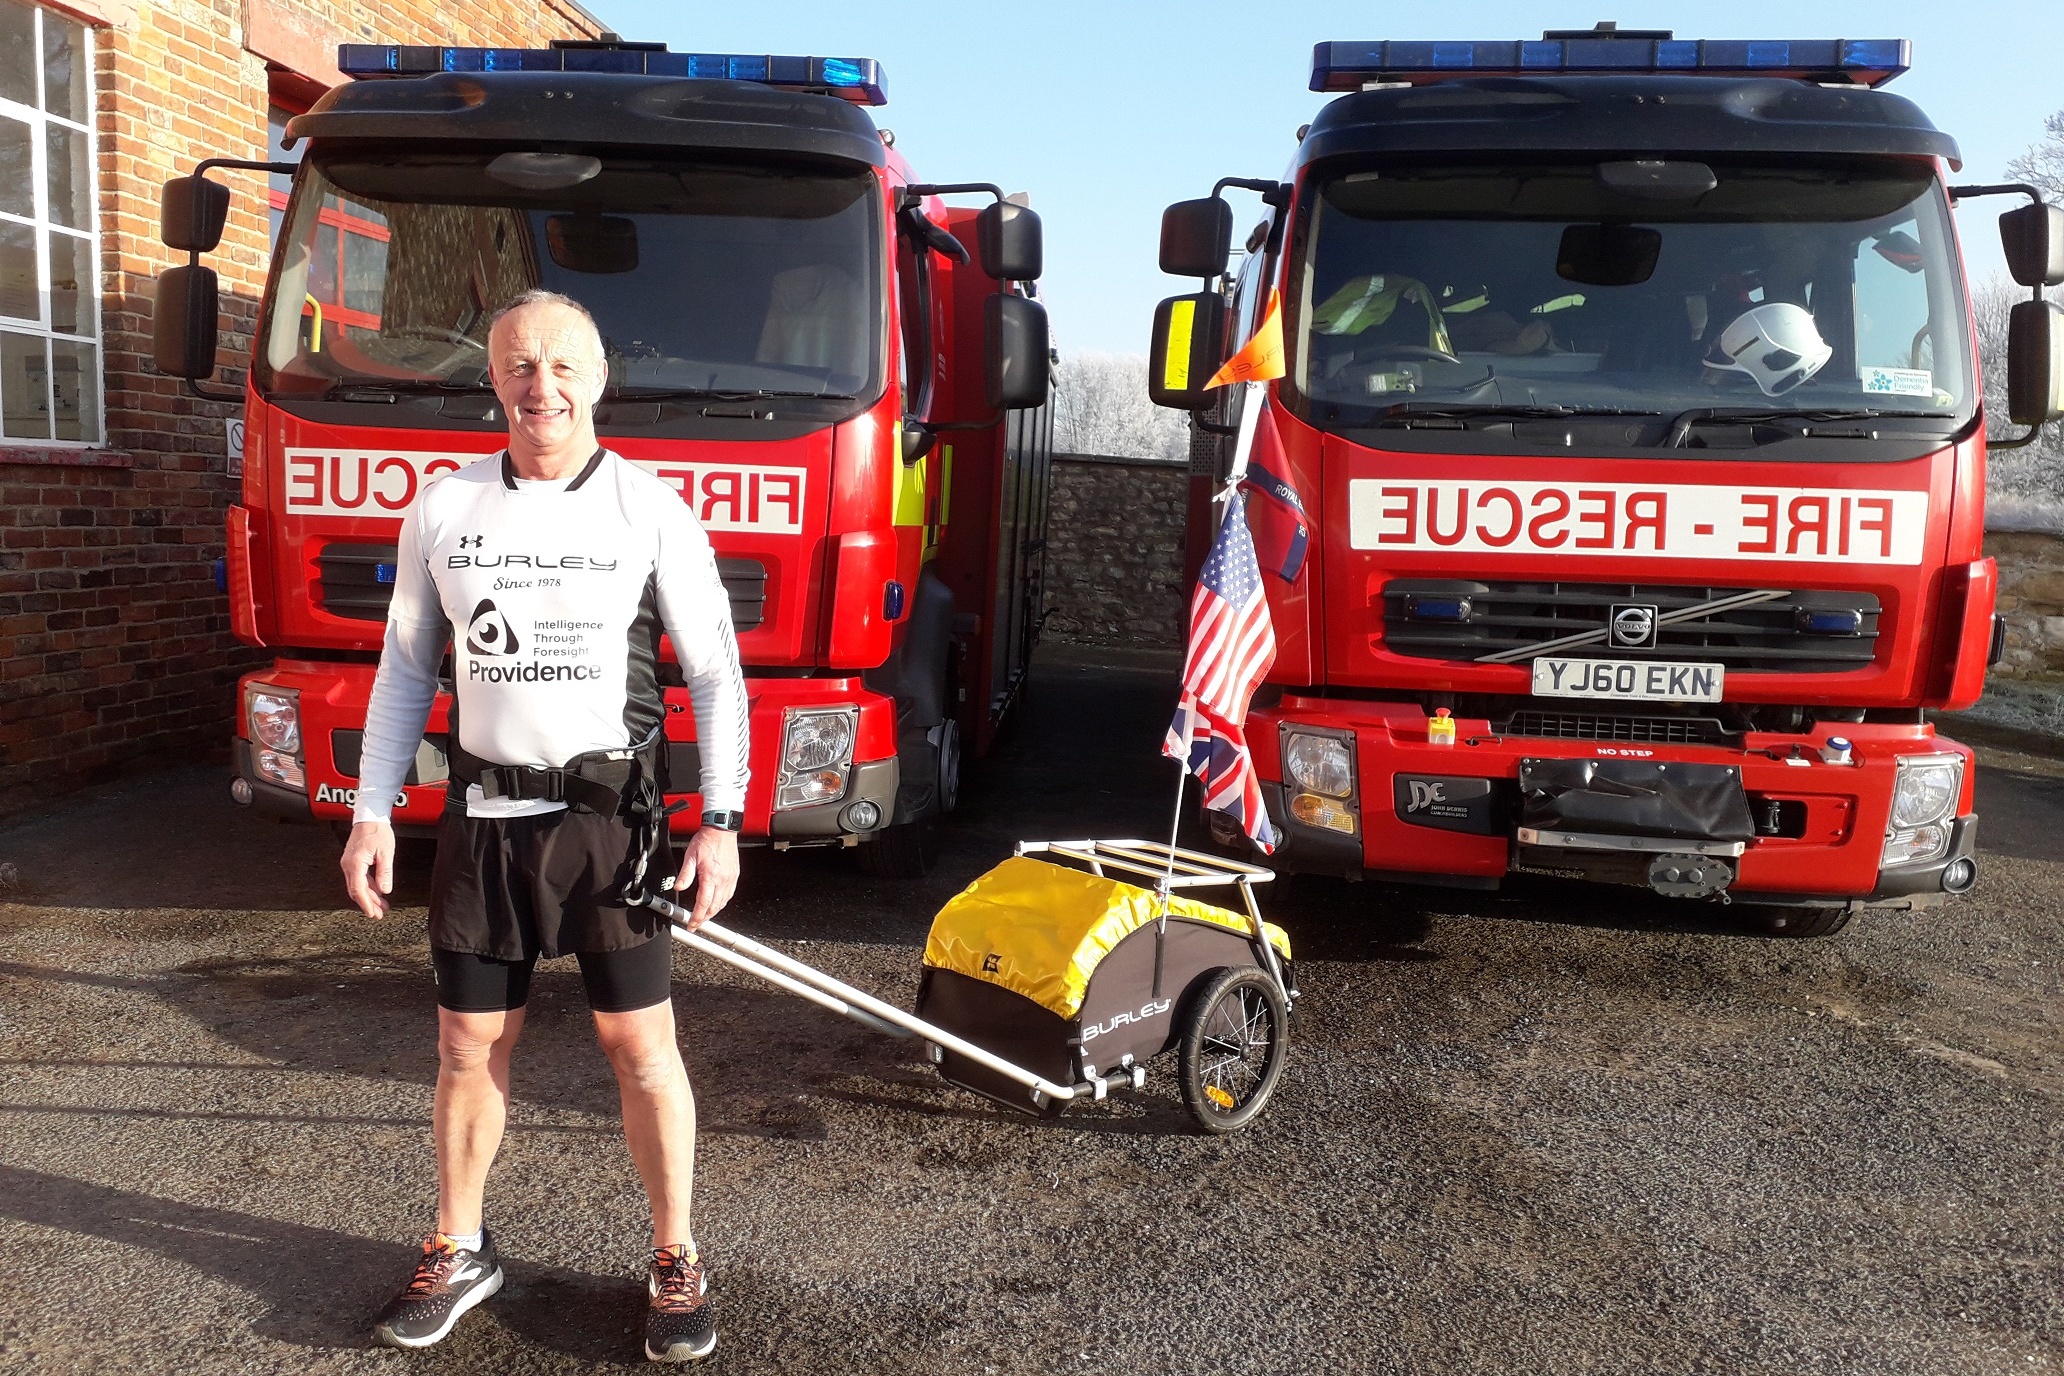 Firefighter in 1,000-mile run challenge along American coast